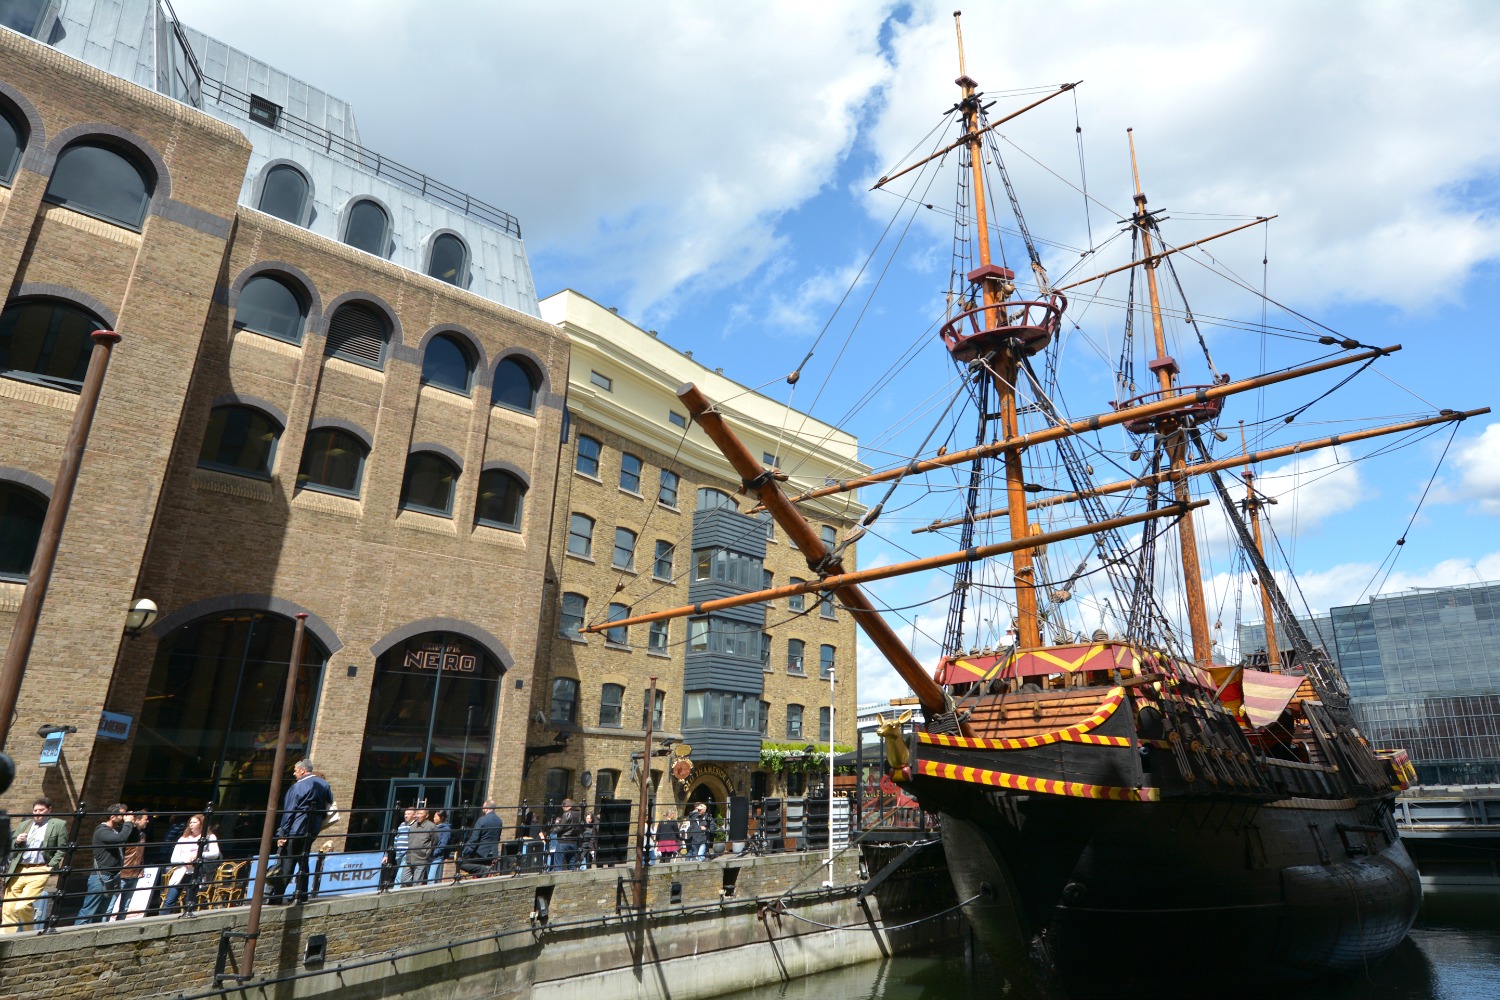 A replica of the Golden Hinde, the galleon which Sir Francis Drake circumnavigated the world in, docked in London - the new Escape Room is a great day out at May half-term in London with kids